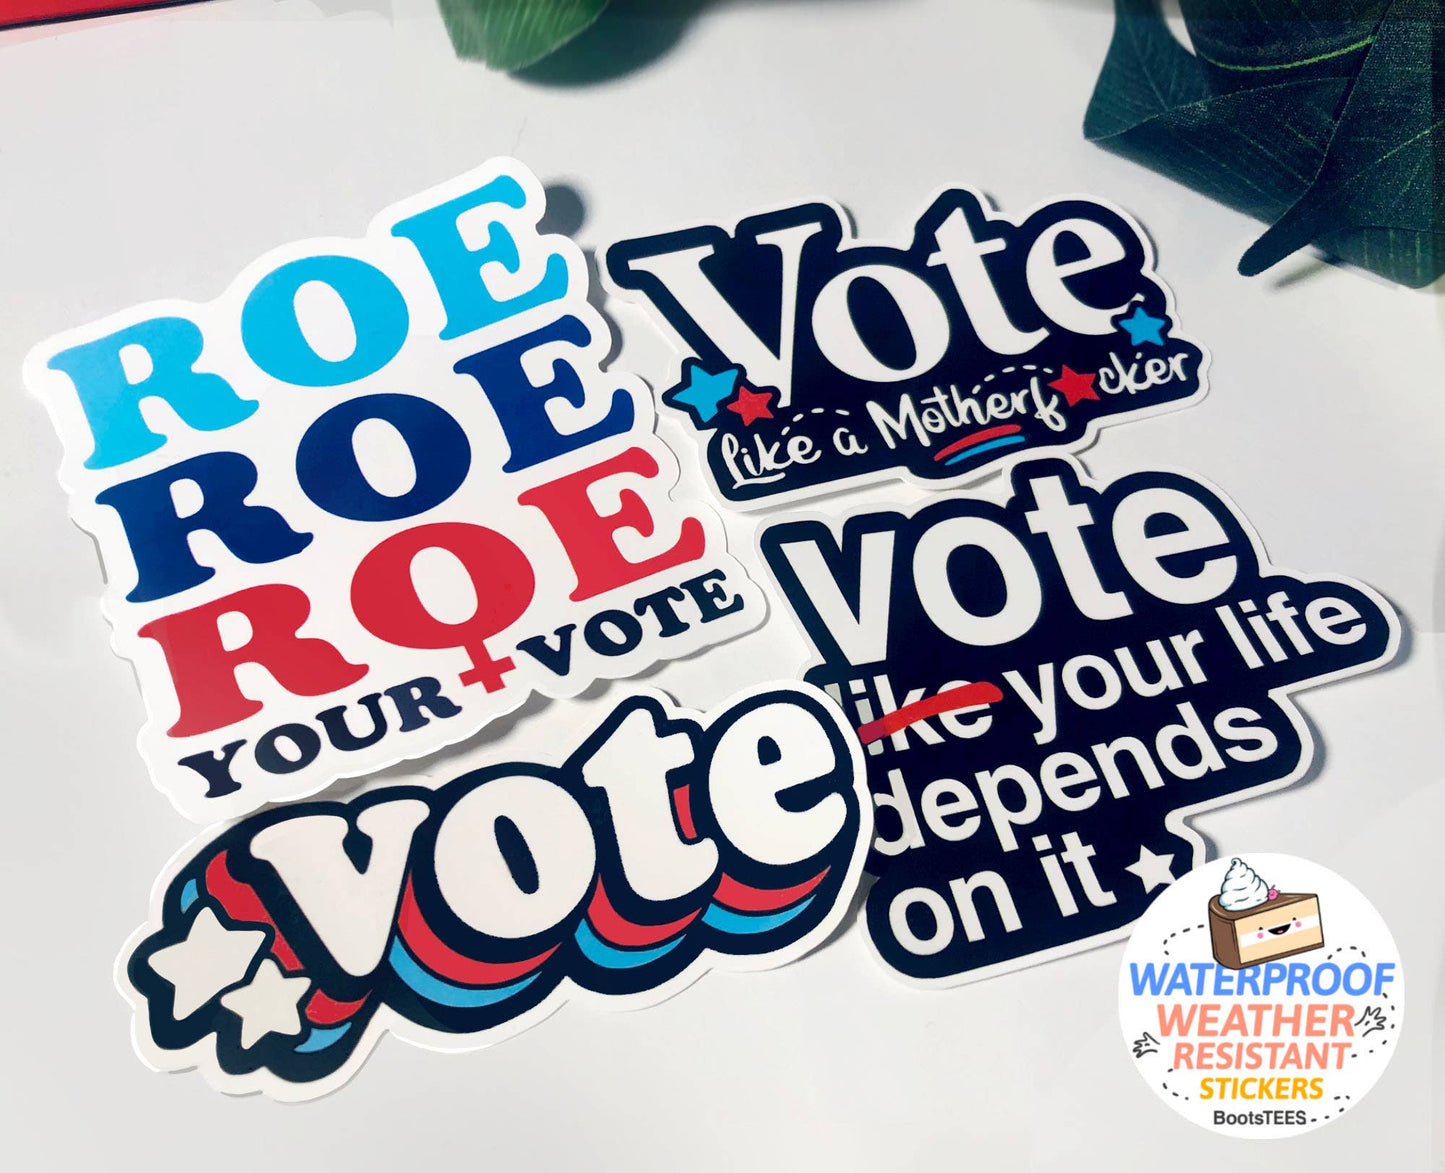 Sticker-Political-07: Vote - Your Life Depends On It